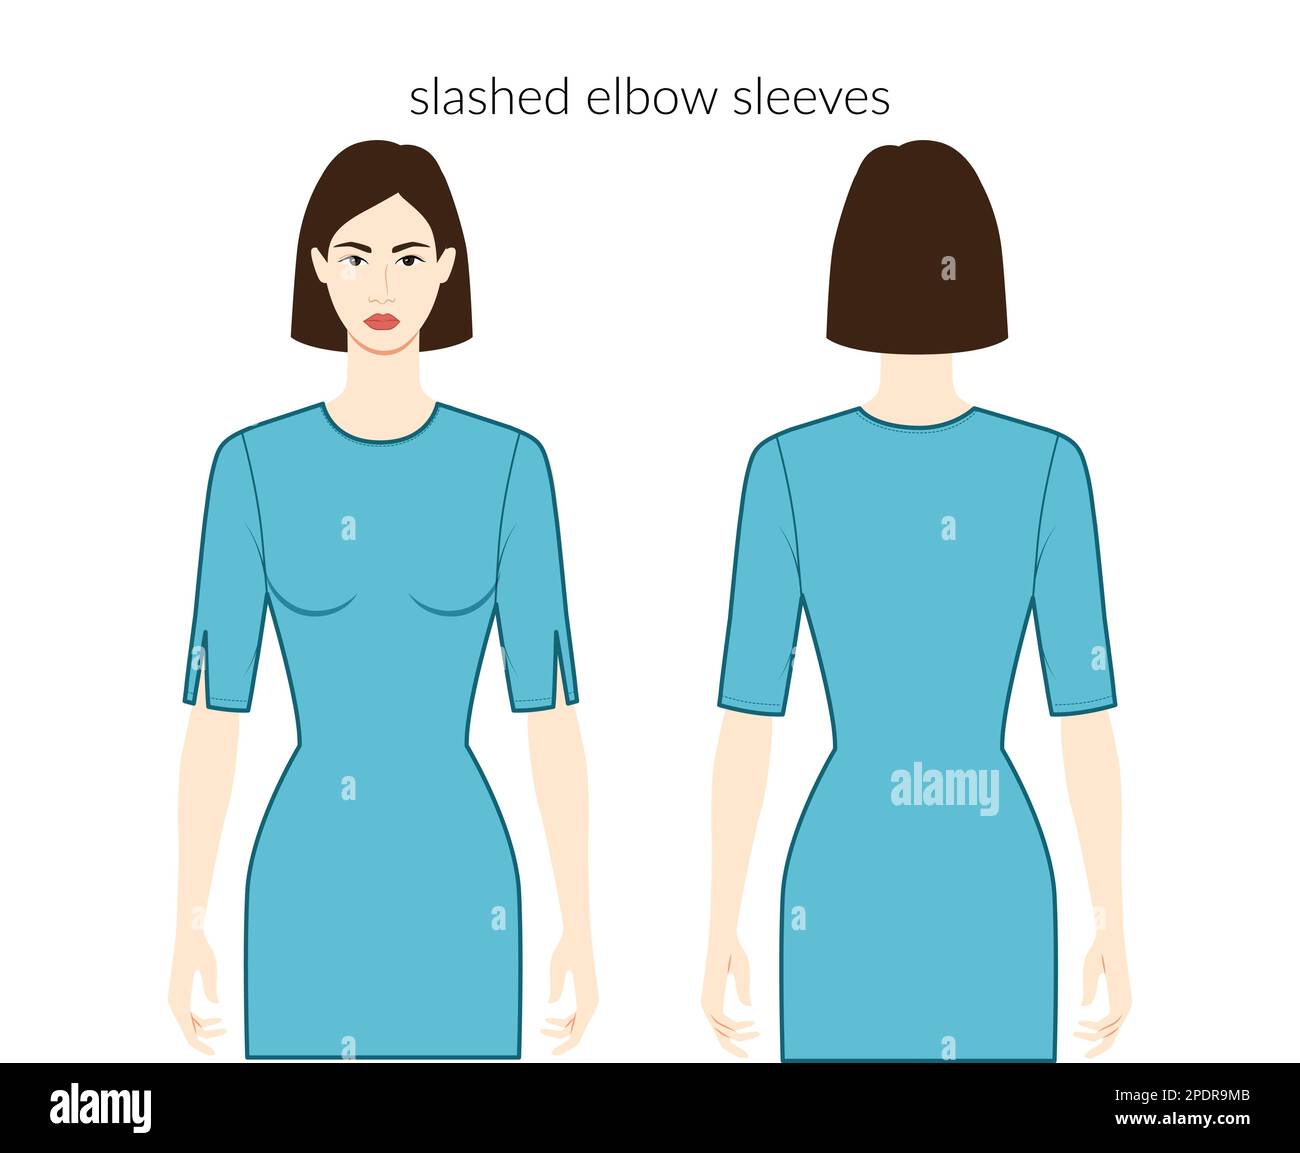 Slashed sleeves Stock Vector Images - Alamy